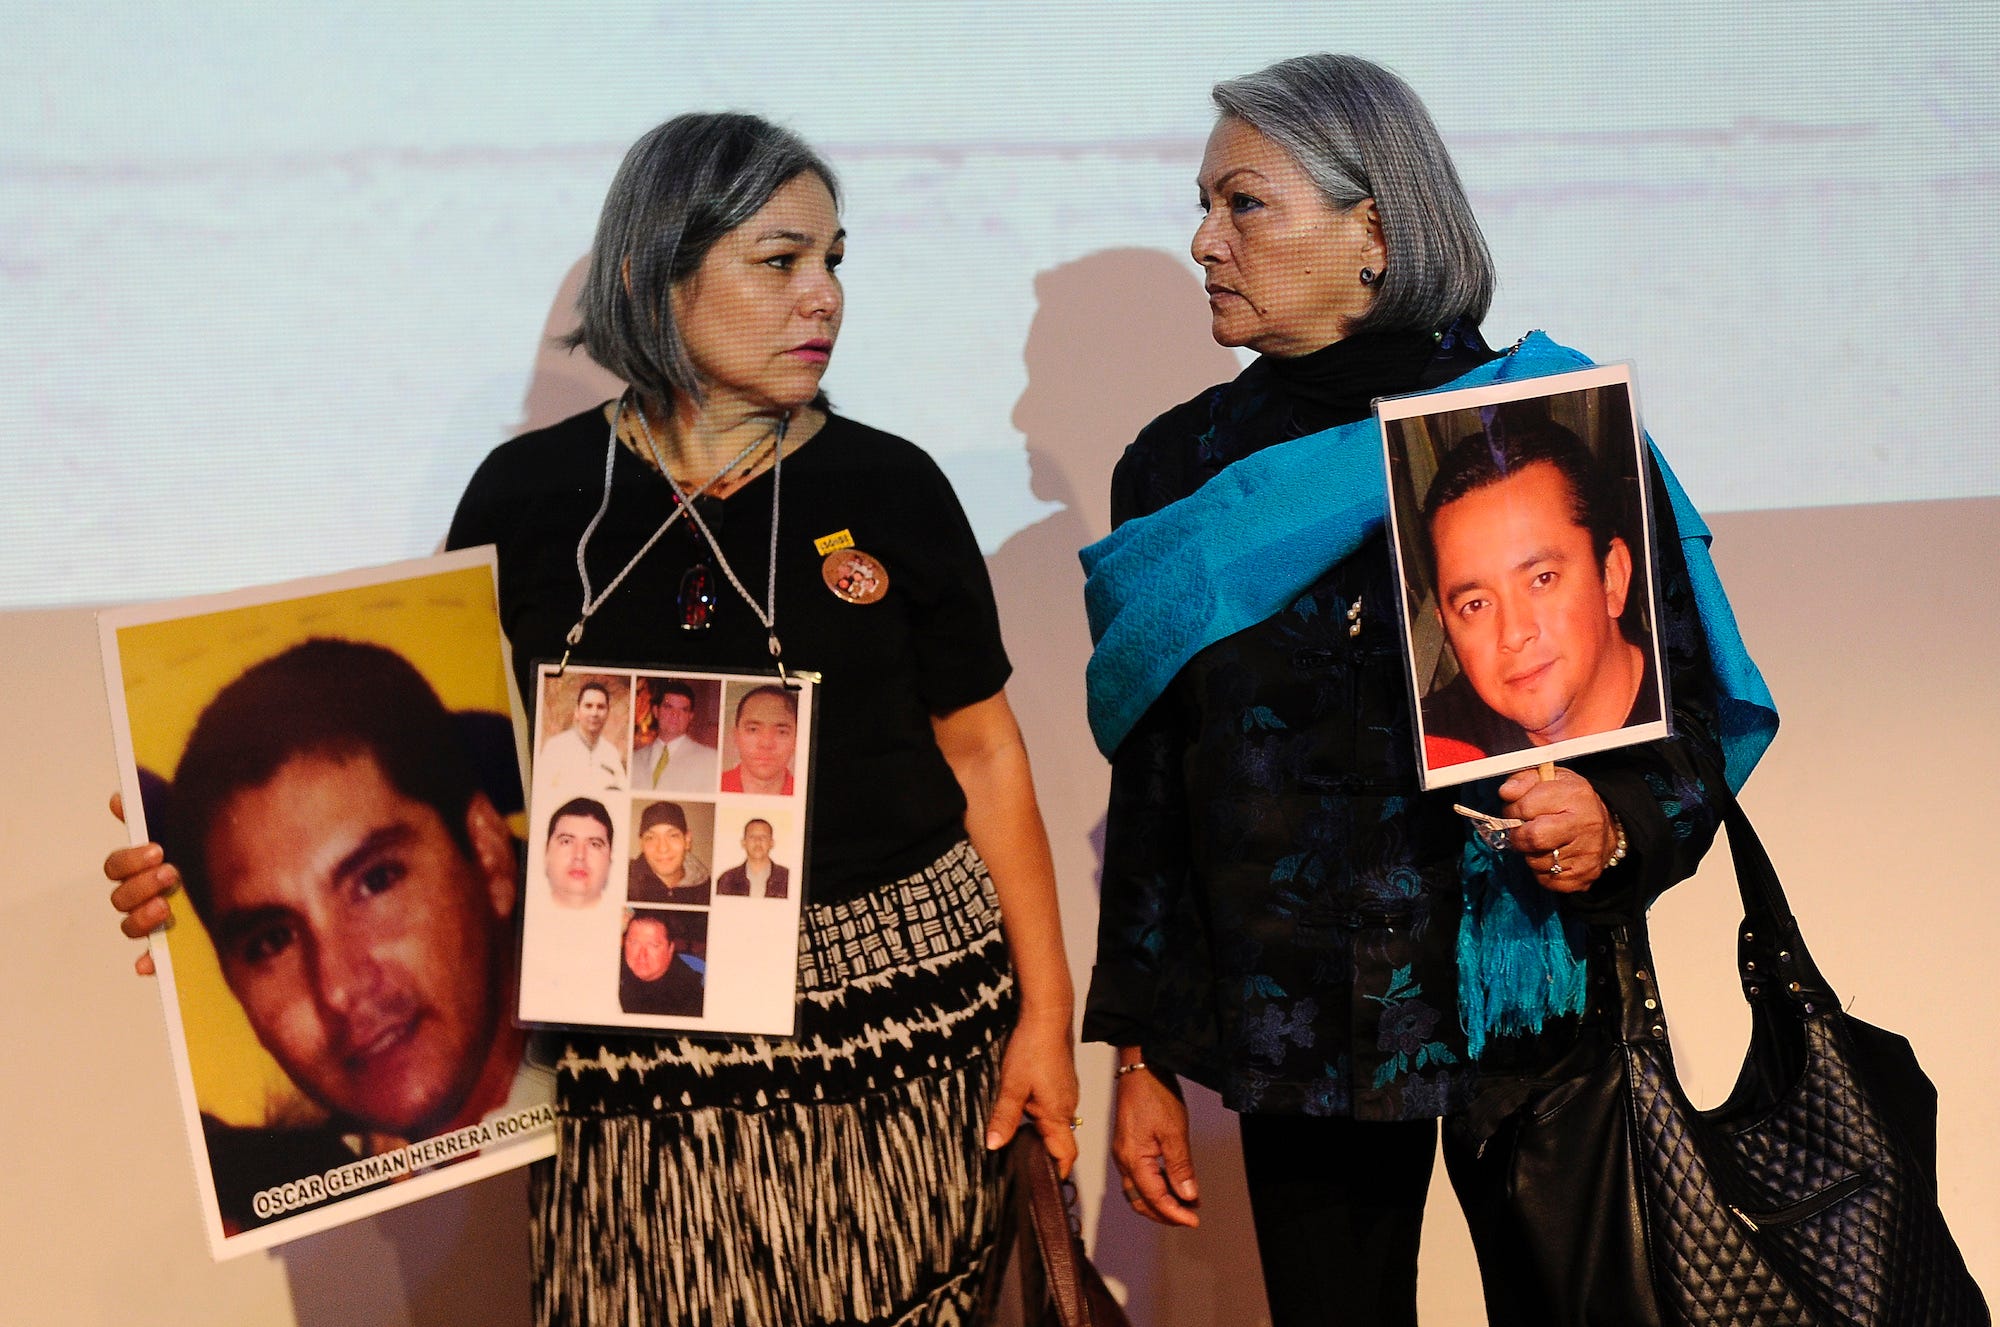 Mexico San Fernando Allende missing forced disappearances